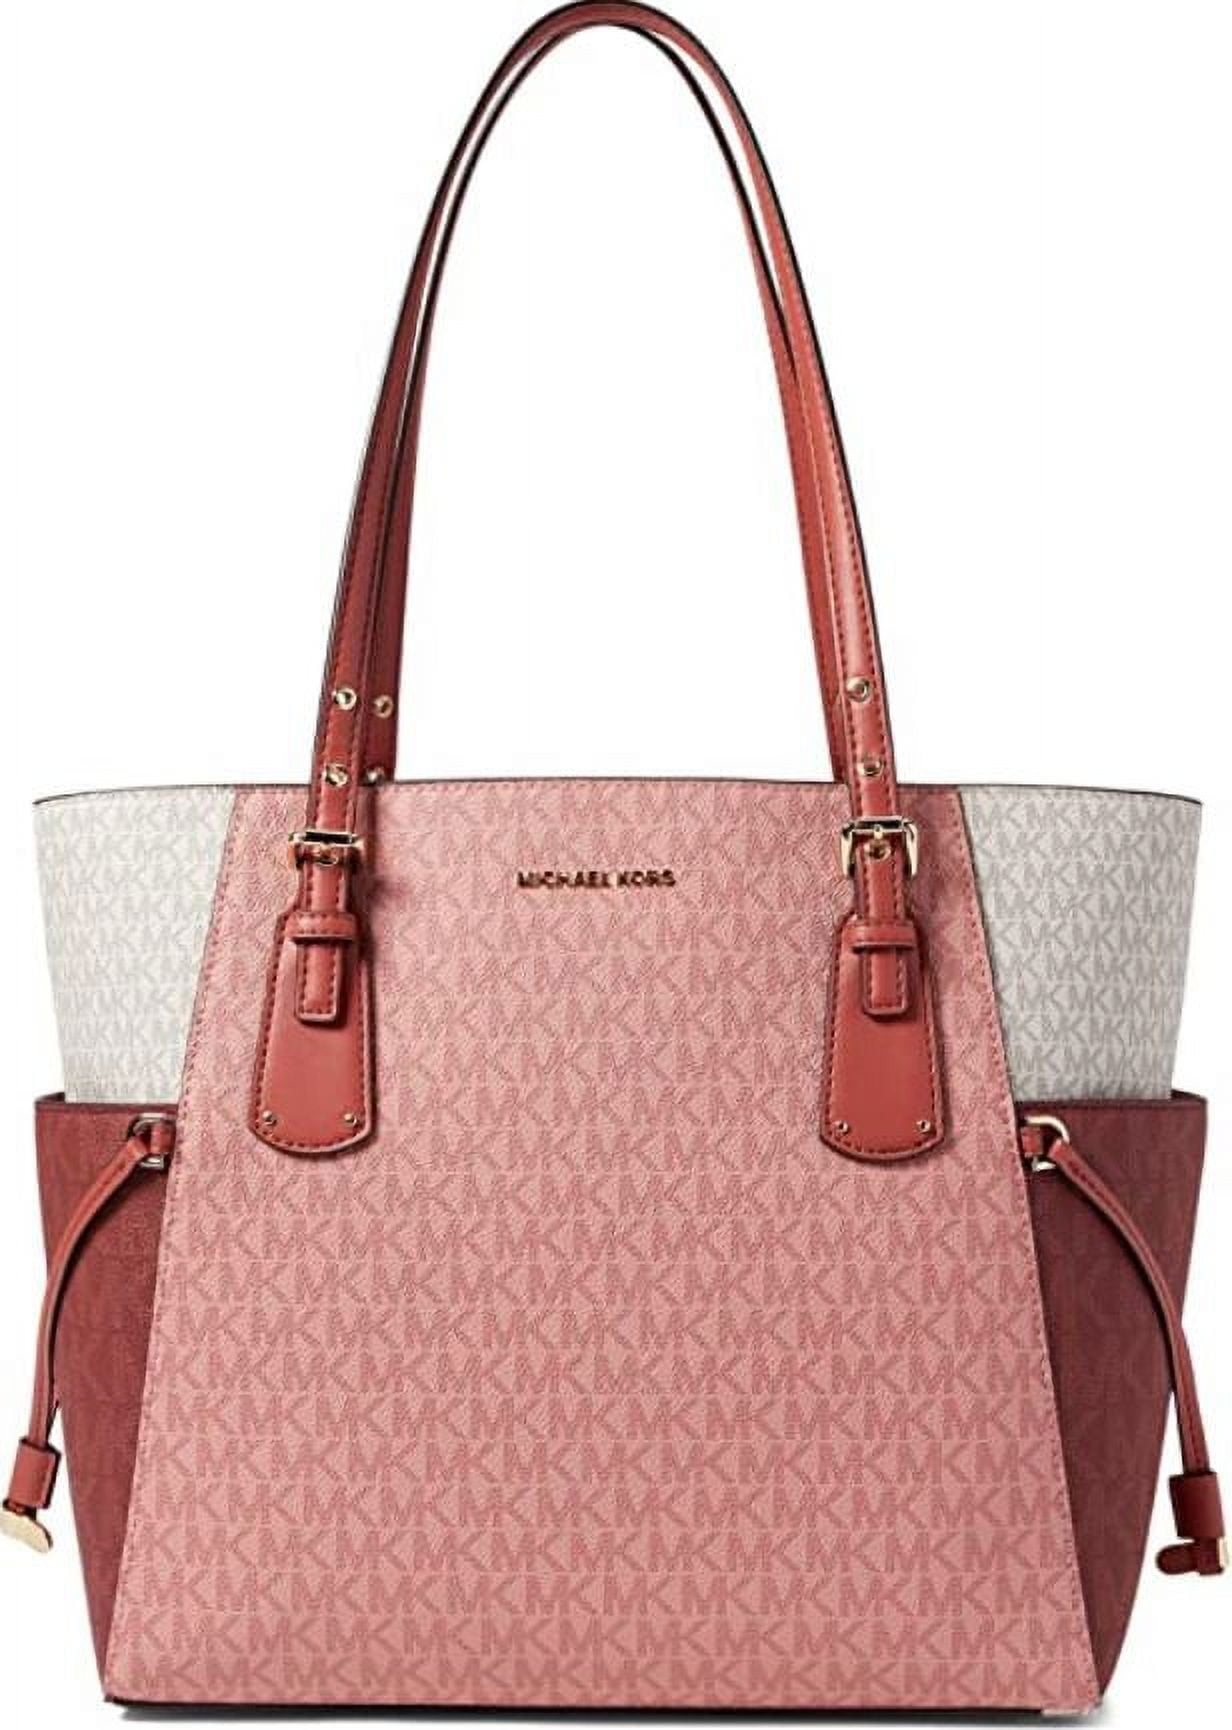 Michael Kors, Bags, Michael Kors Voyager Small Saffiano Leather Tote  Bag3hgv6t4tnwtpearl Gray